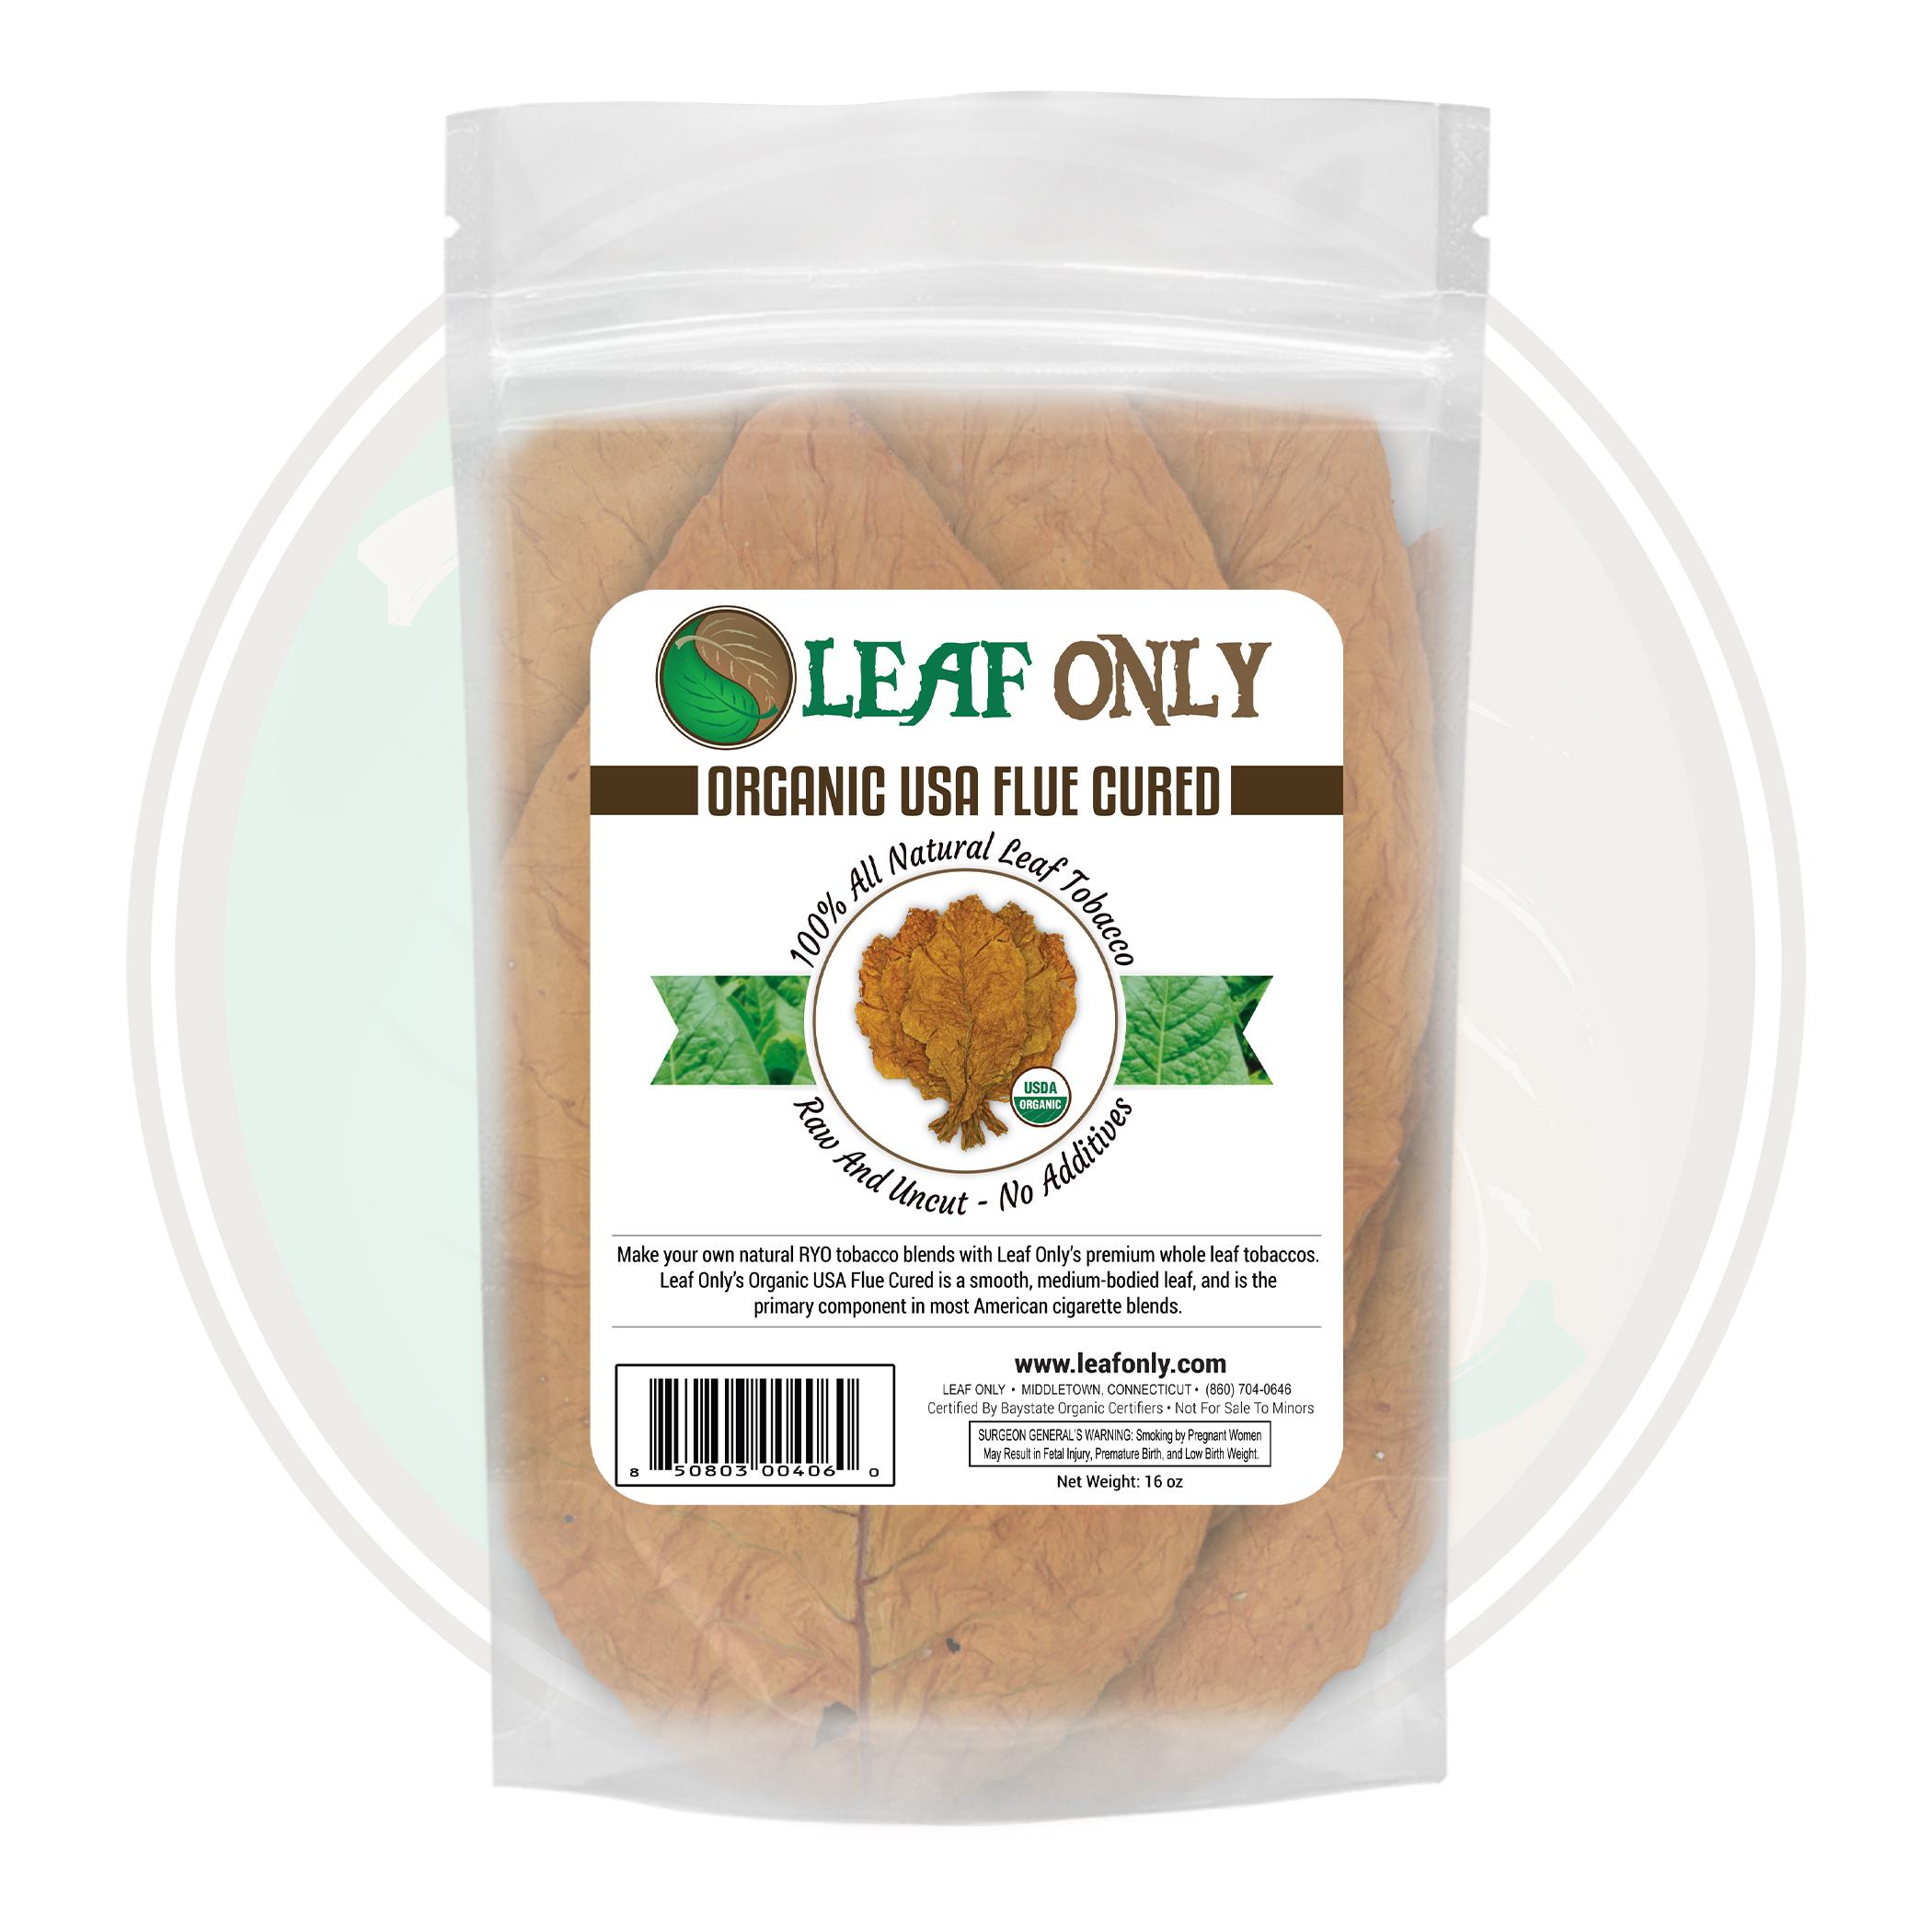 Certified USDA Organic American Grown Virginia Flue Cured Whole Leaf Tobacco for Roll Your Own Leaf Only